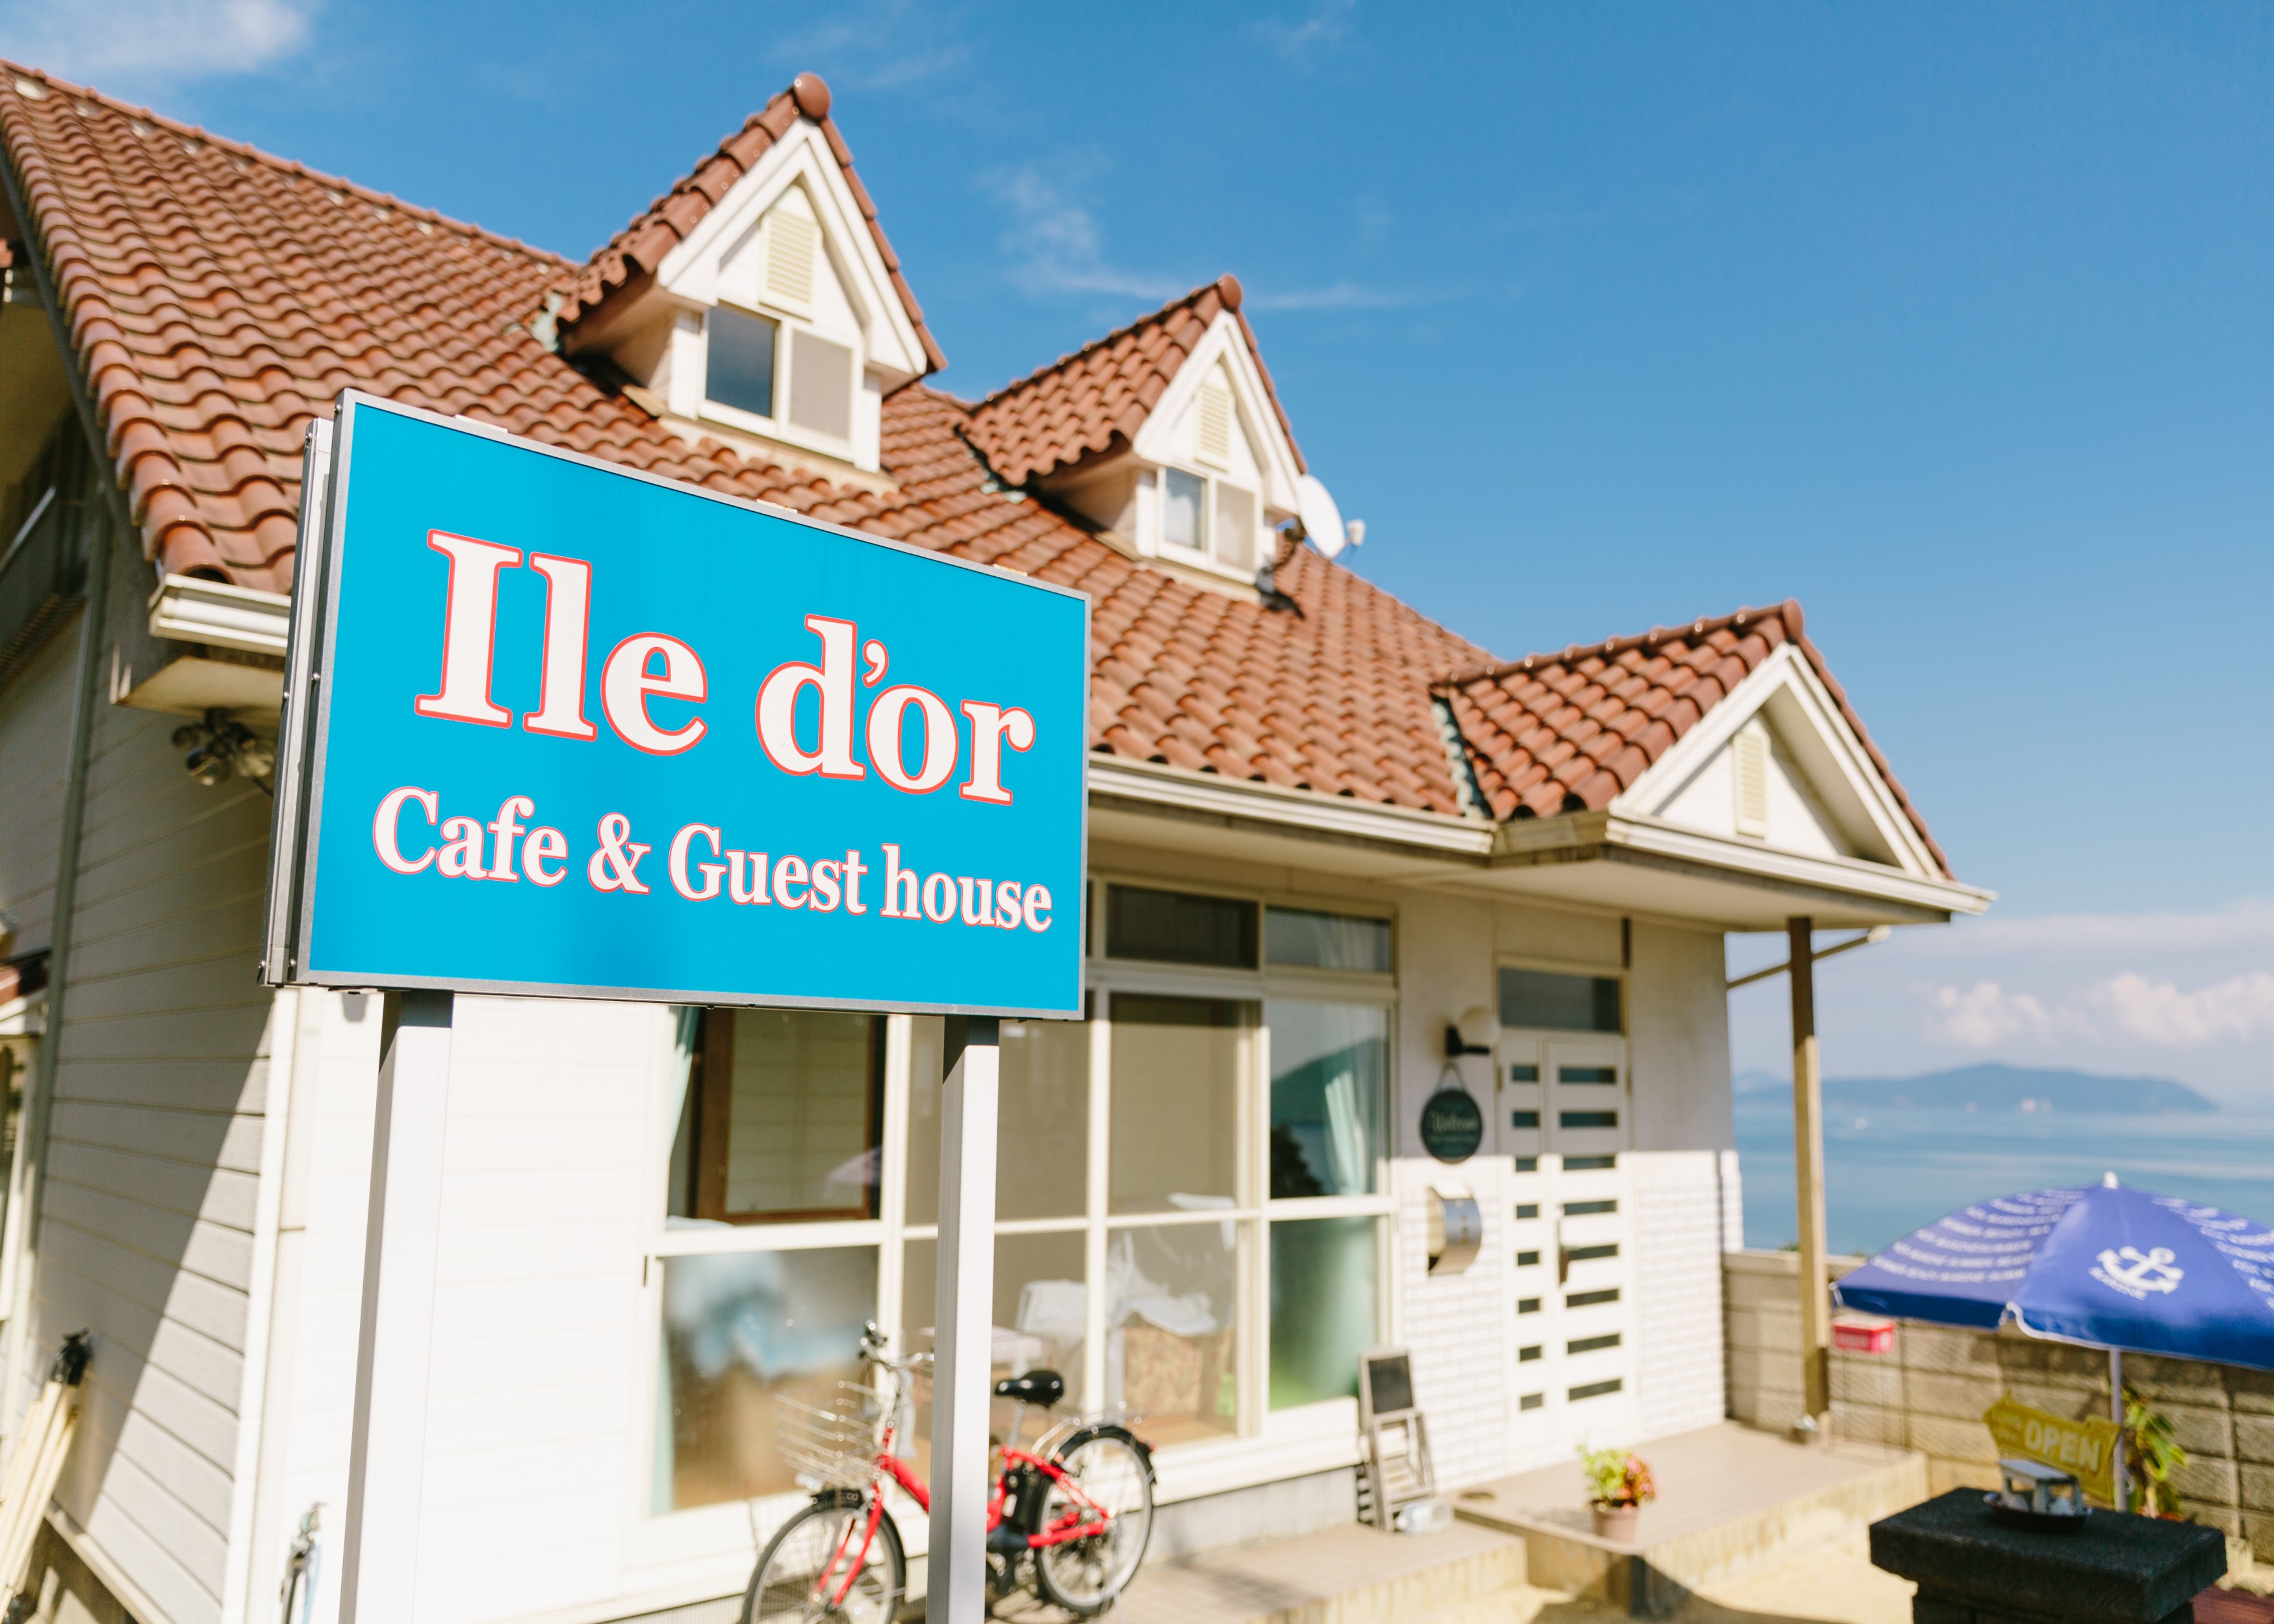 Ile d’or cafe&guesthouse ＜大飛島＞